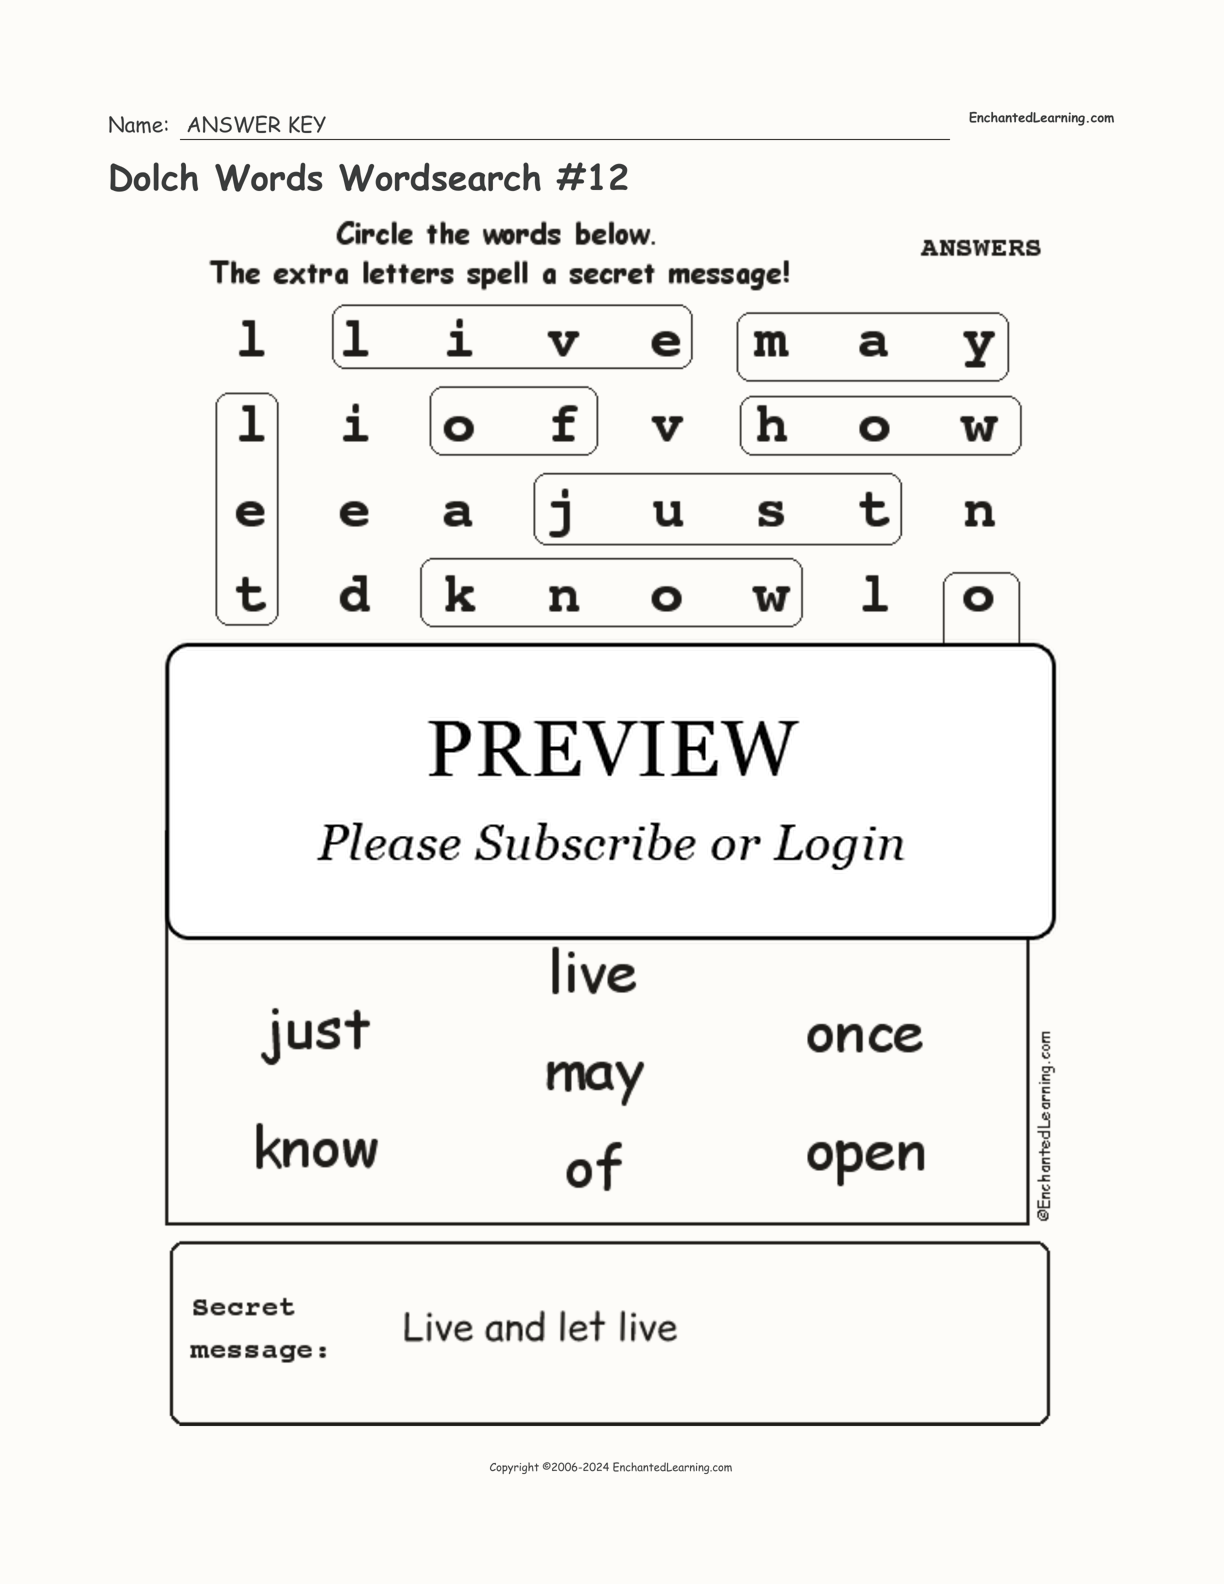 Dolch Words Wordsearch #12 interactive worksheet page 2